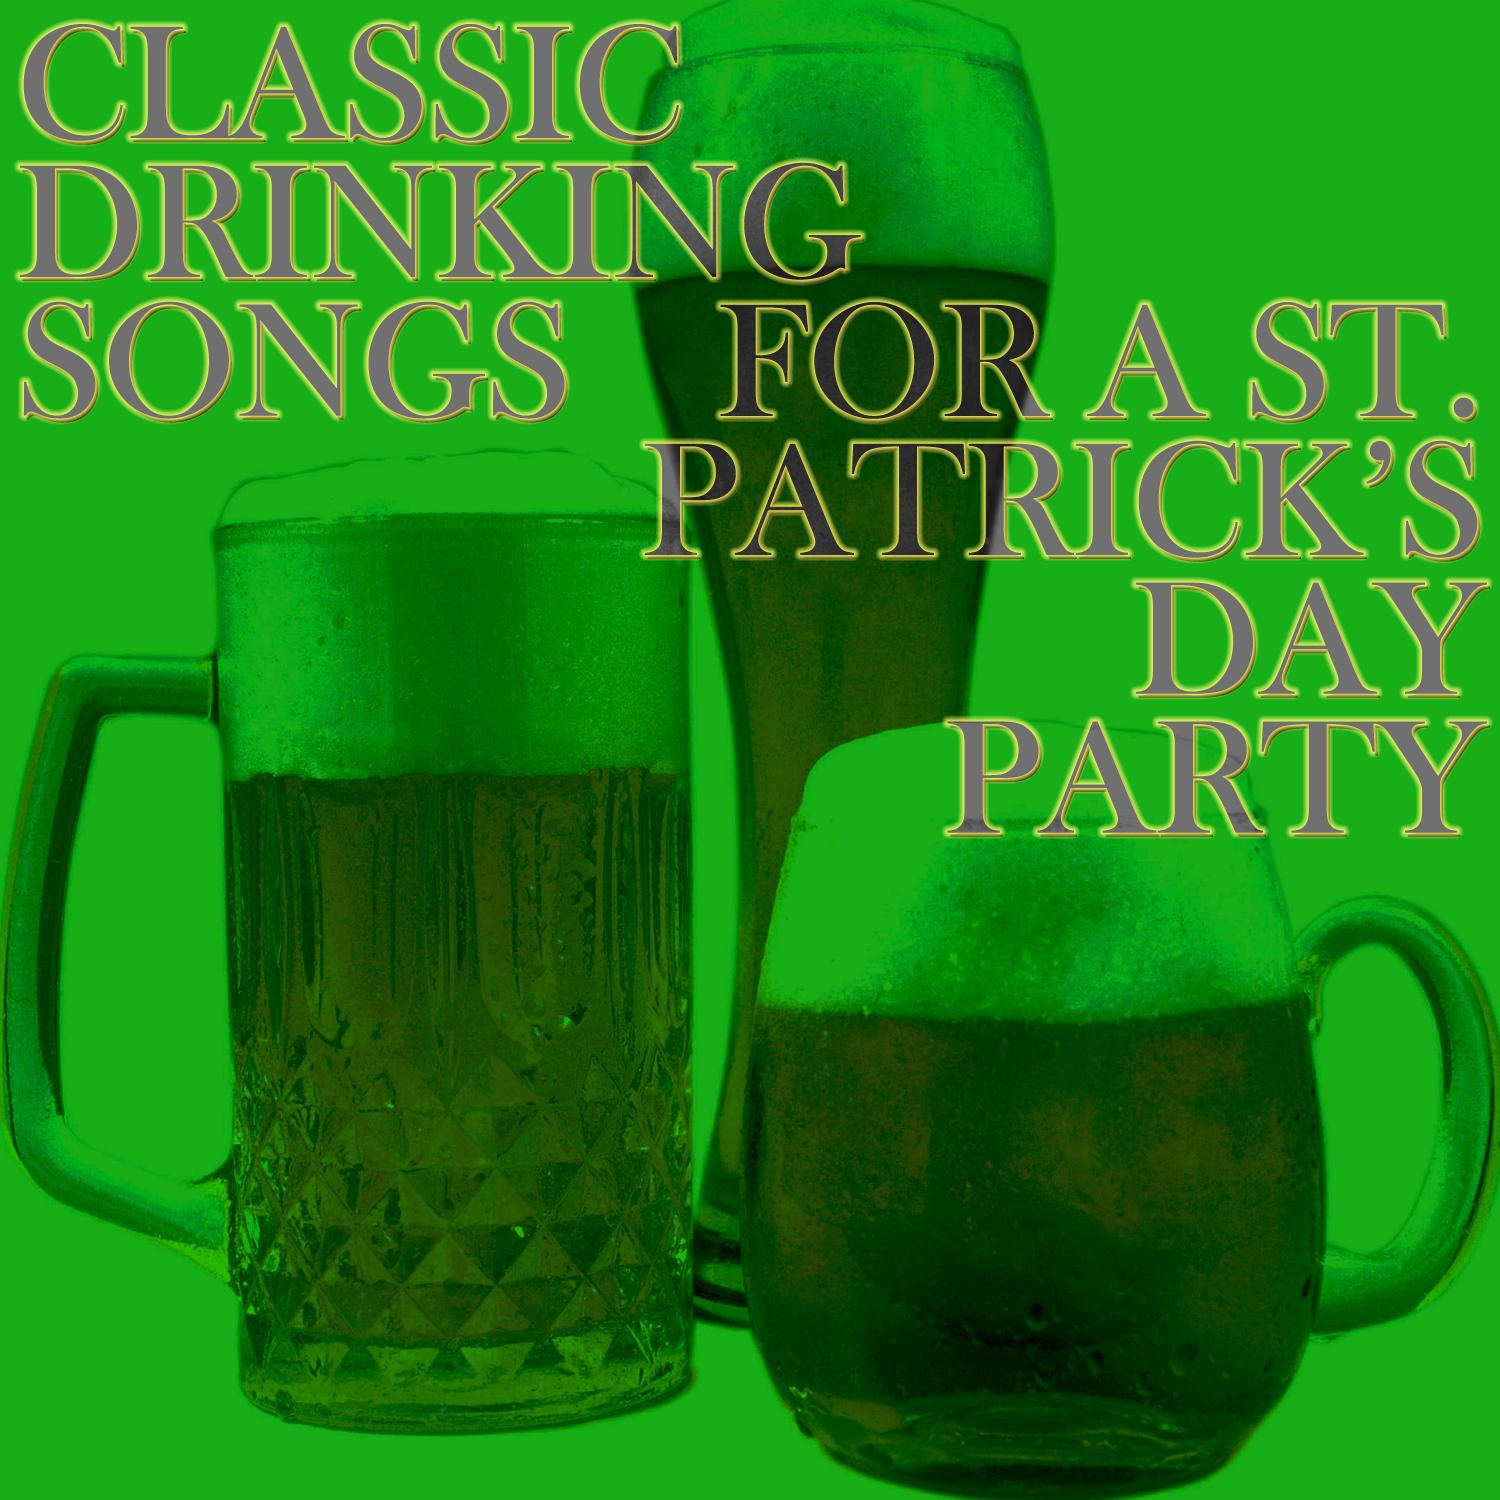 30 Fun Drinking Songs for Your St. Patrick's Day Party